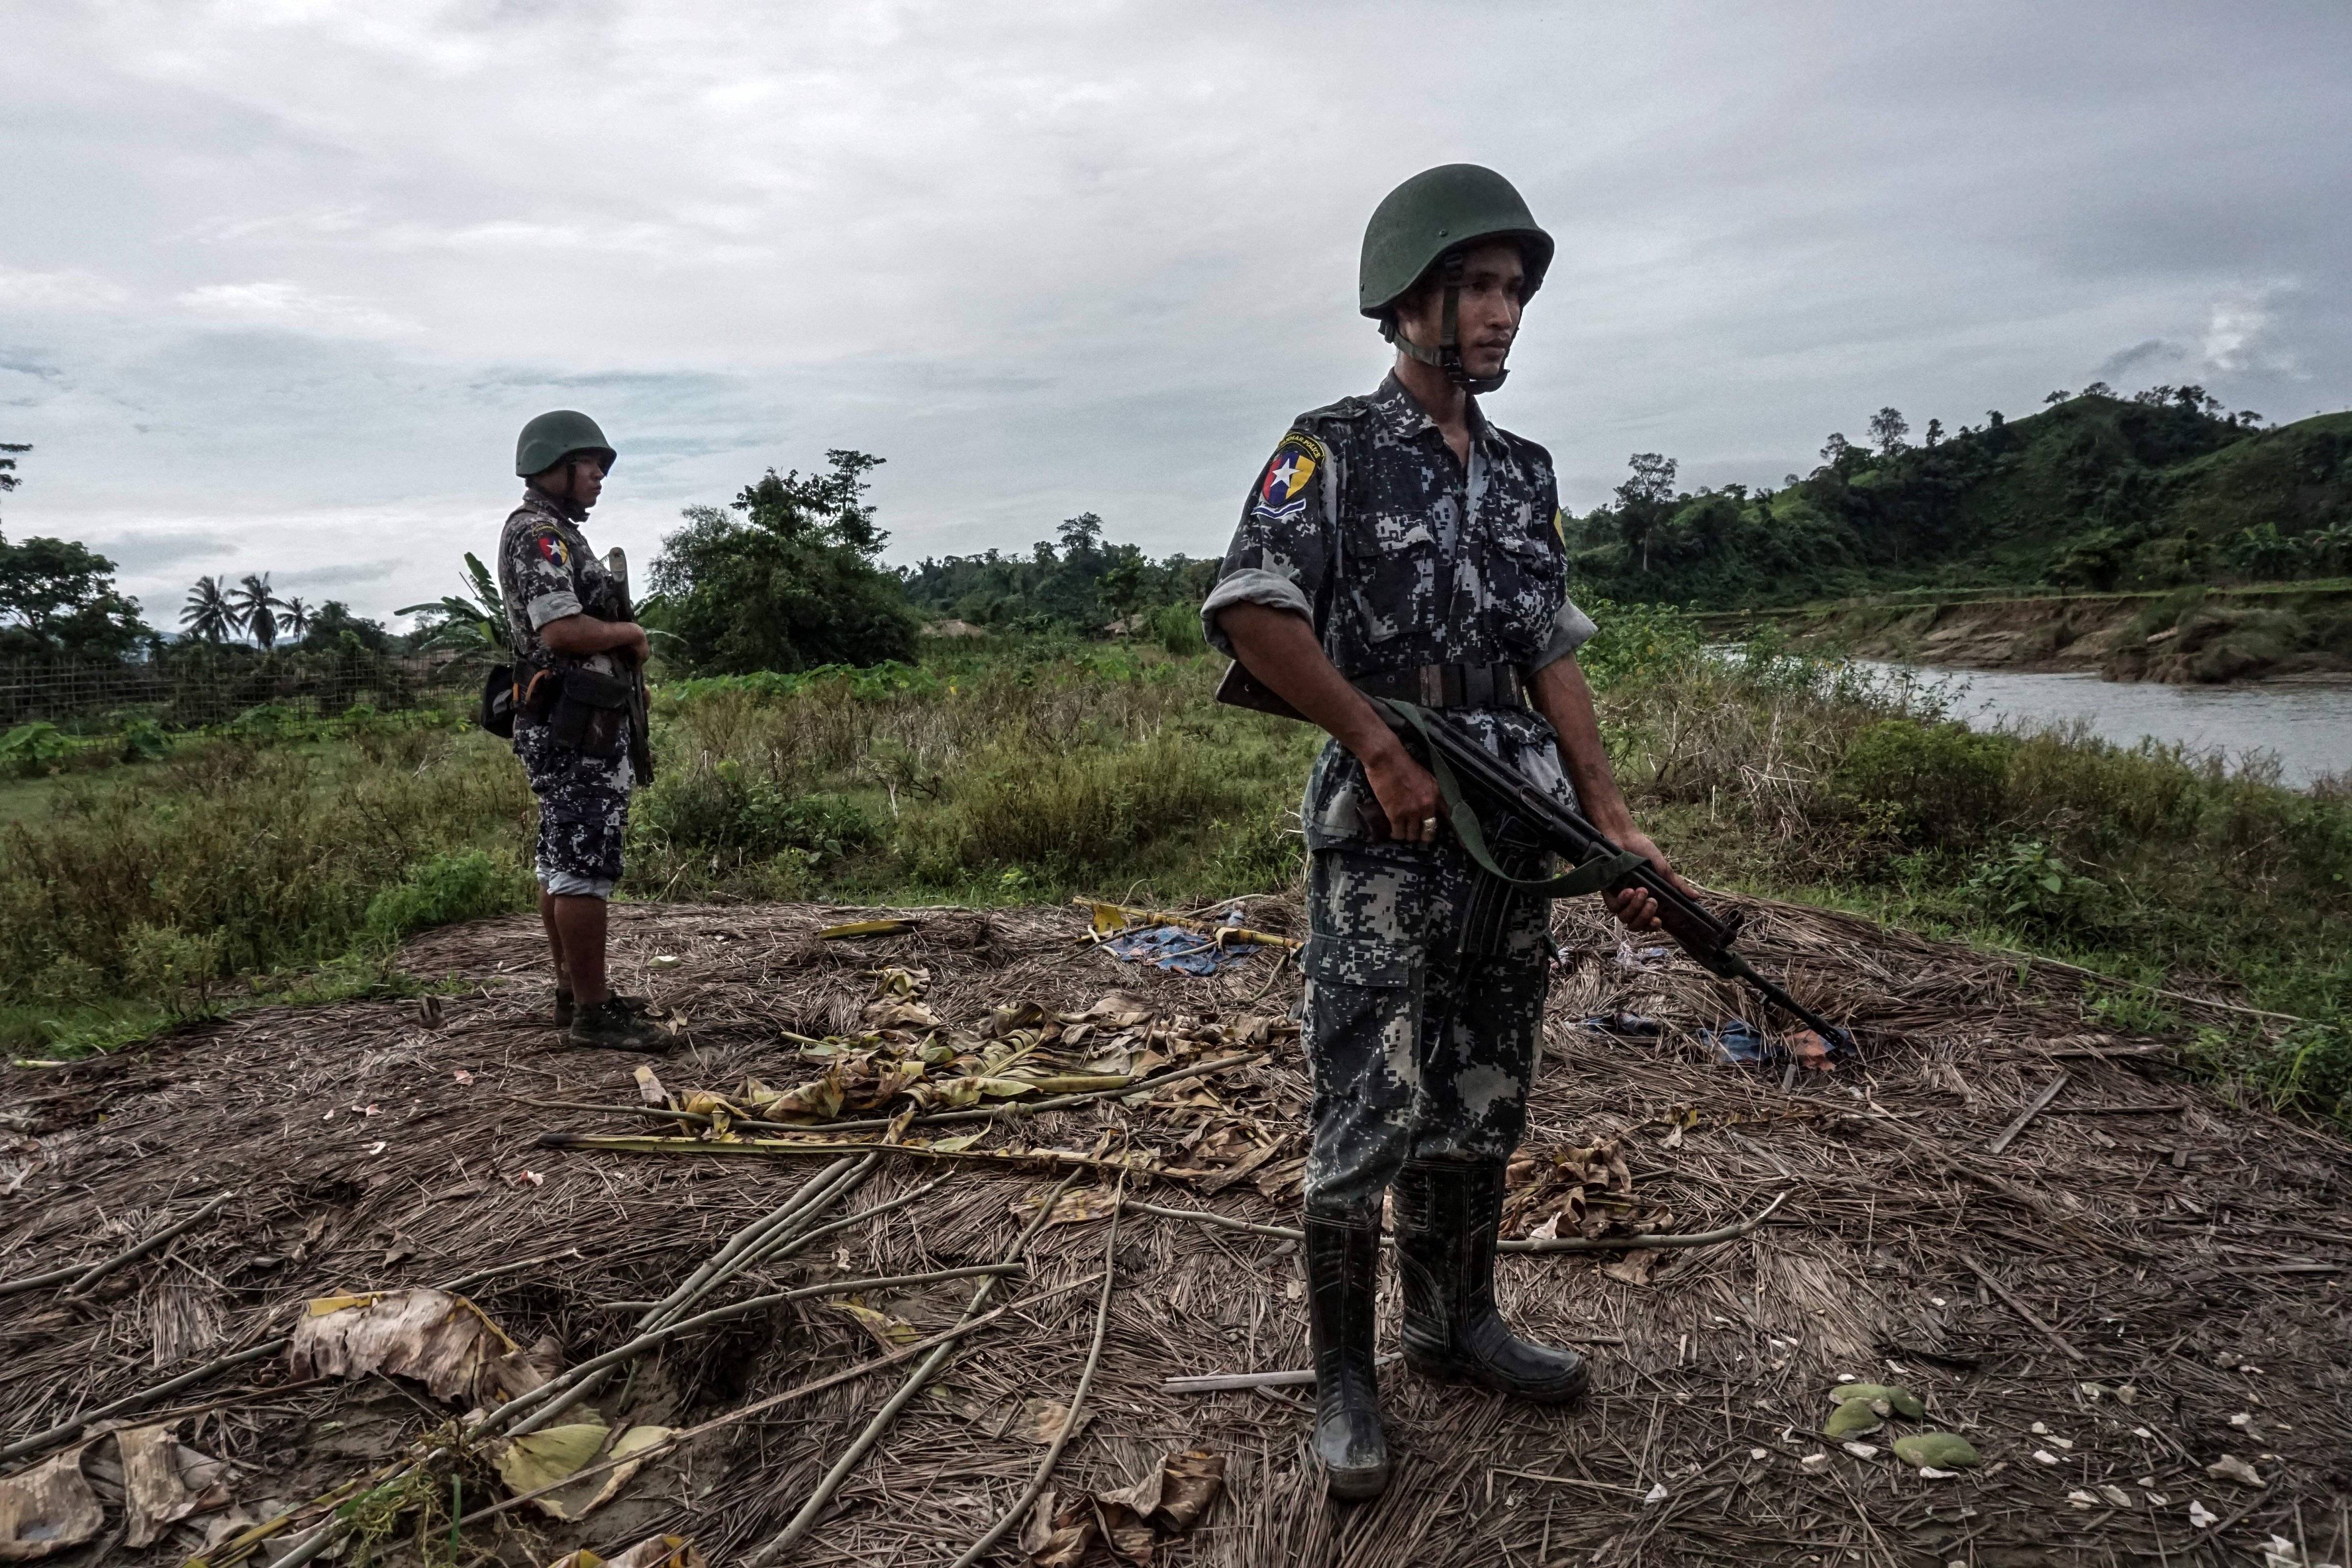 Border police stand guard at Tinmay village, Buthidaung township in Myanmar's northern Rakhine state on July 14, 2017. (Hla Hla Htay—AFP/Getty Images)